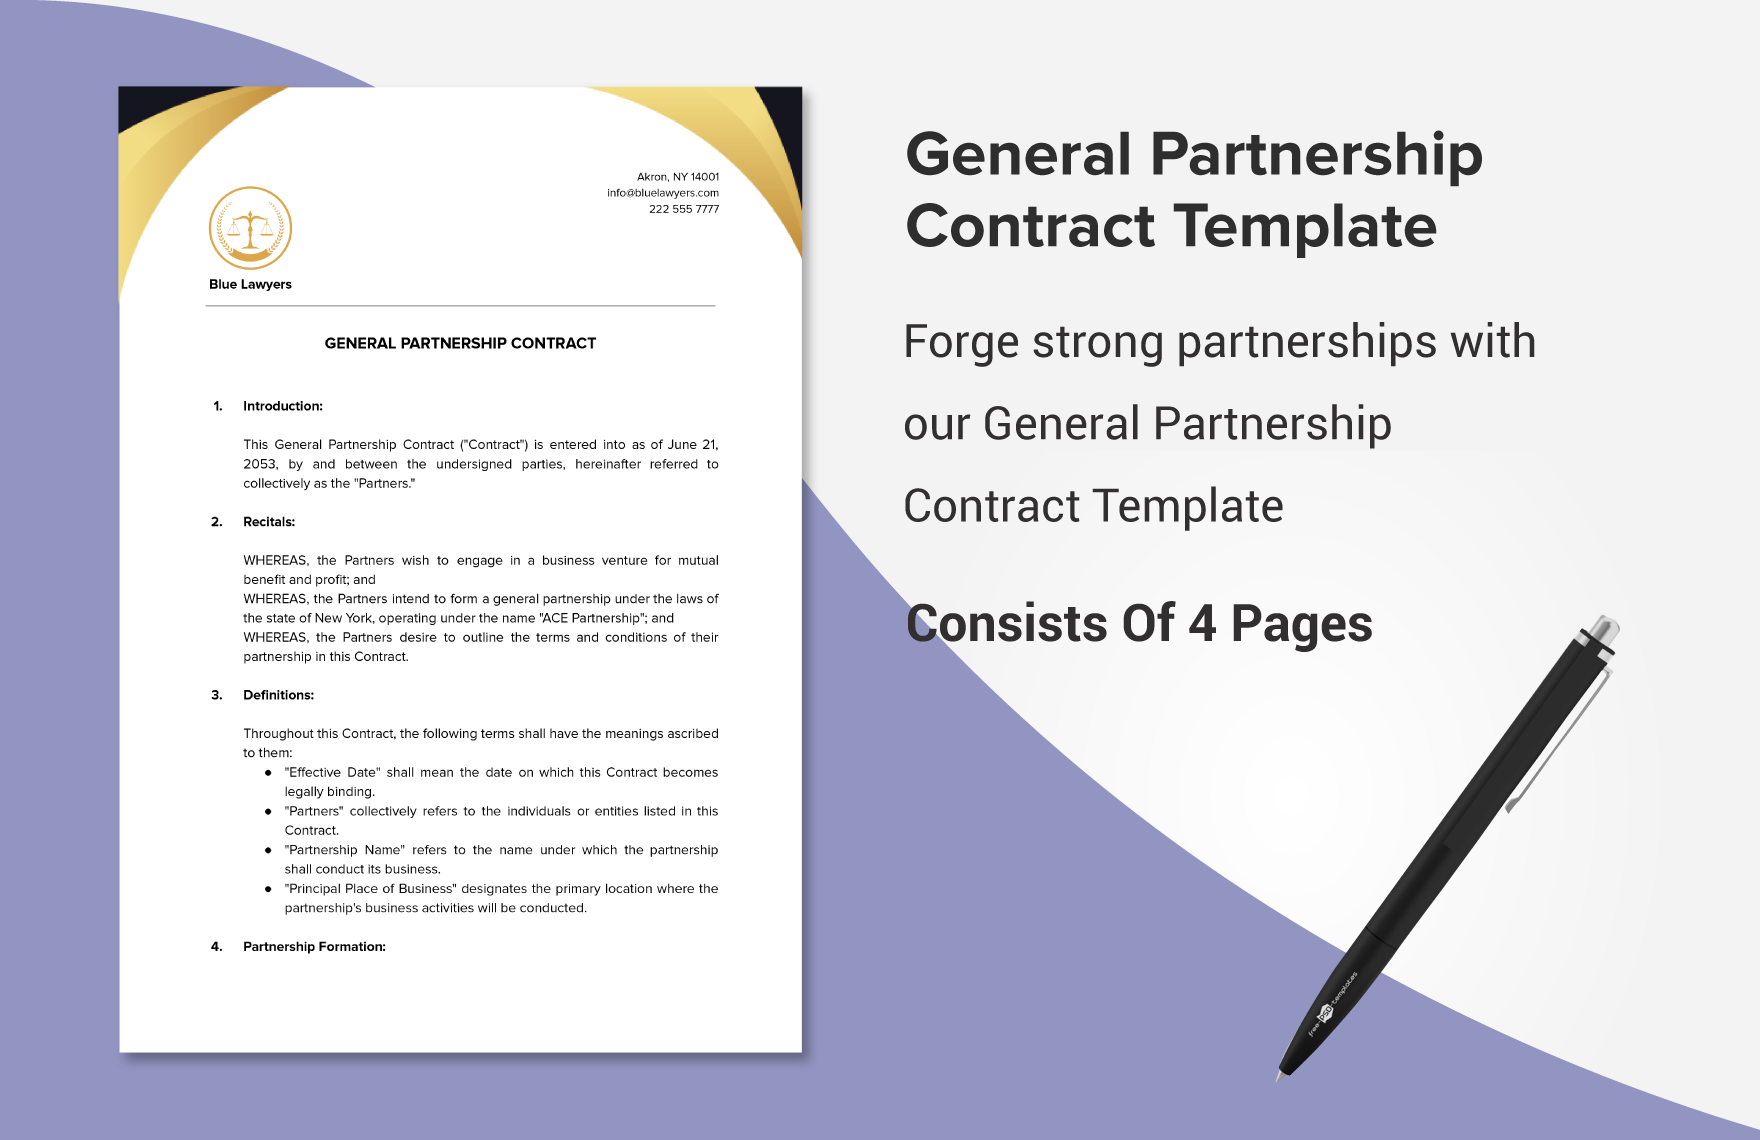 General Partnership Contract Template